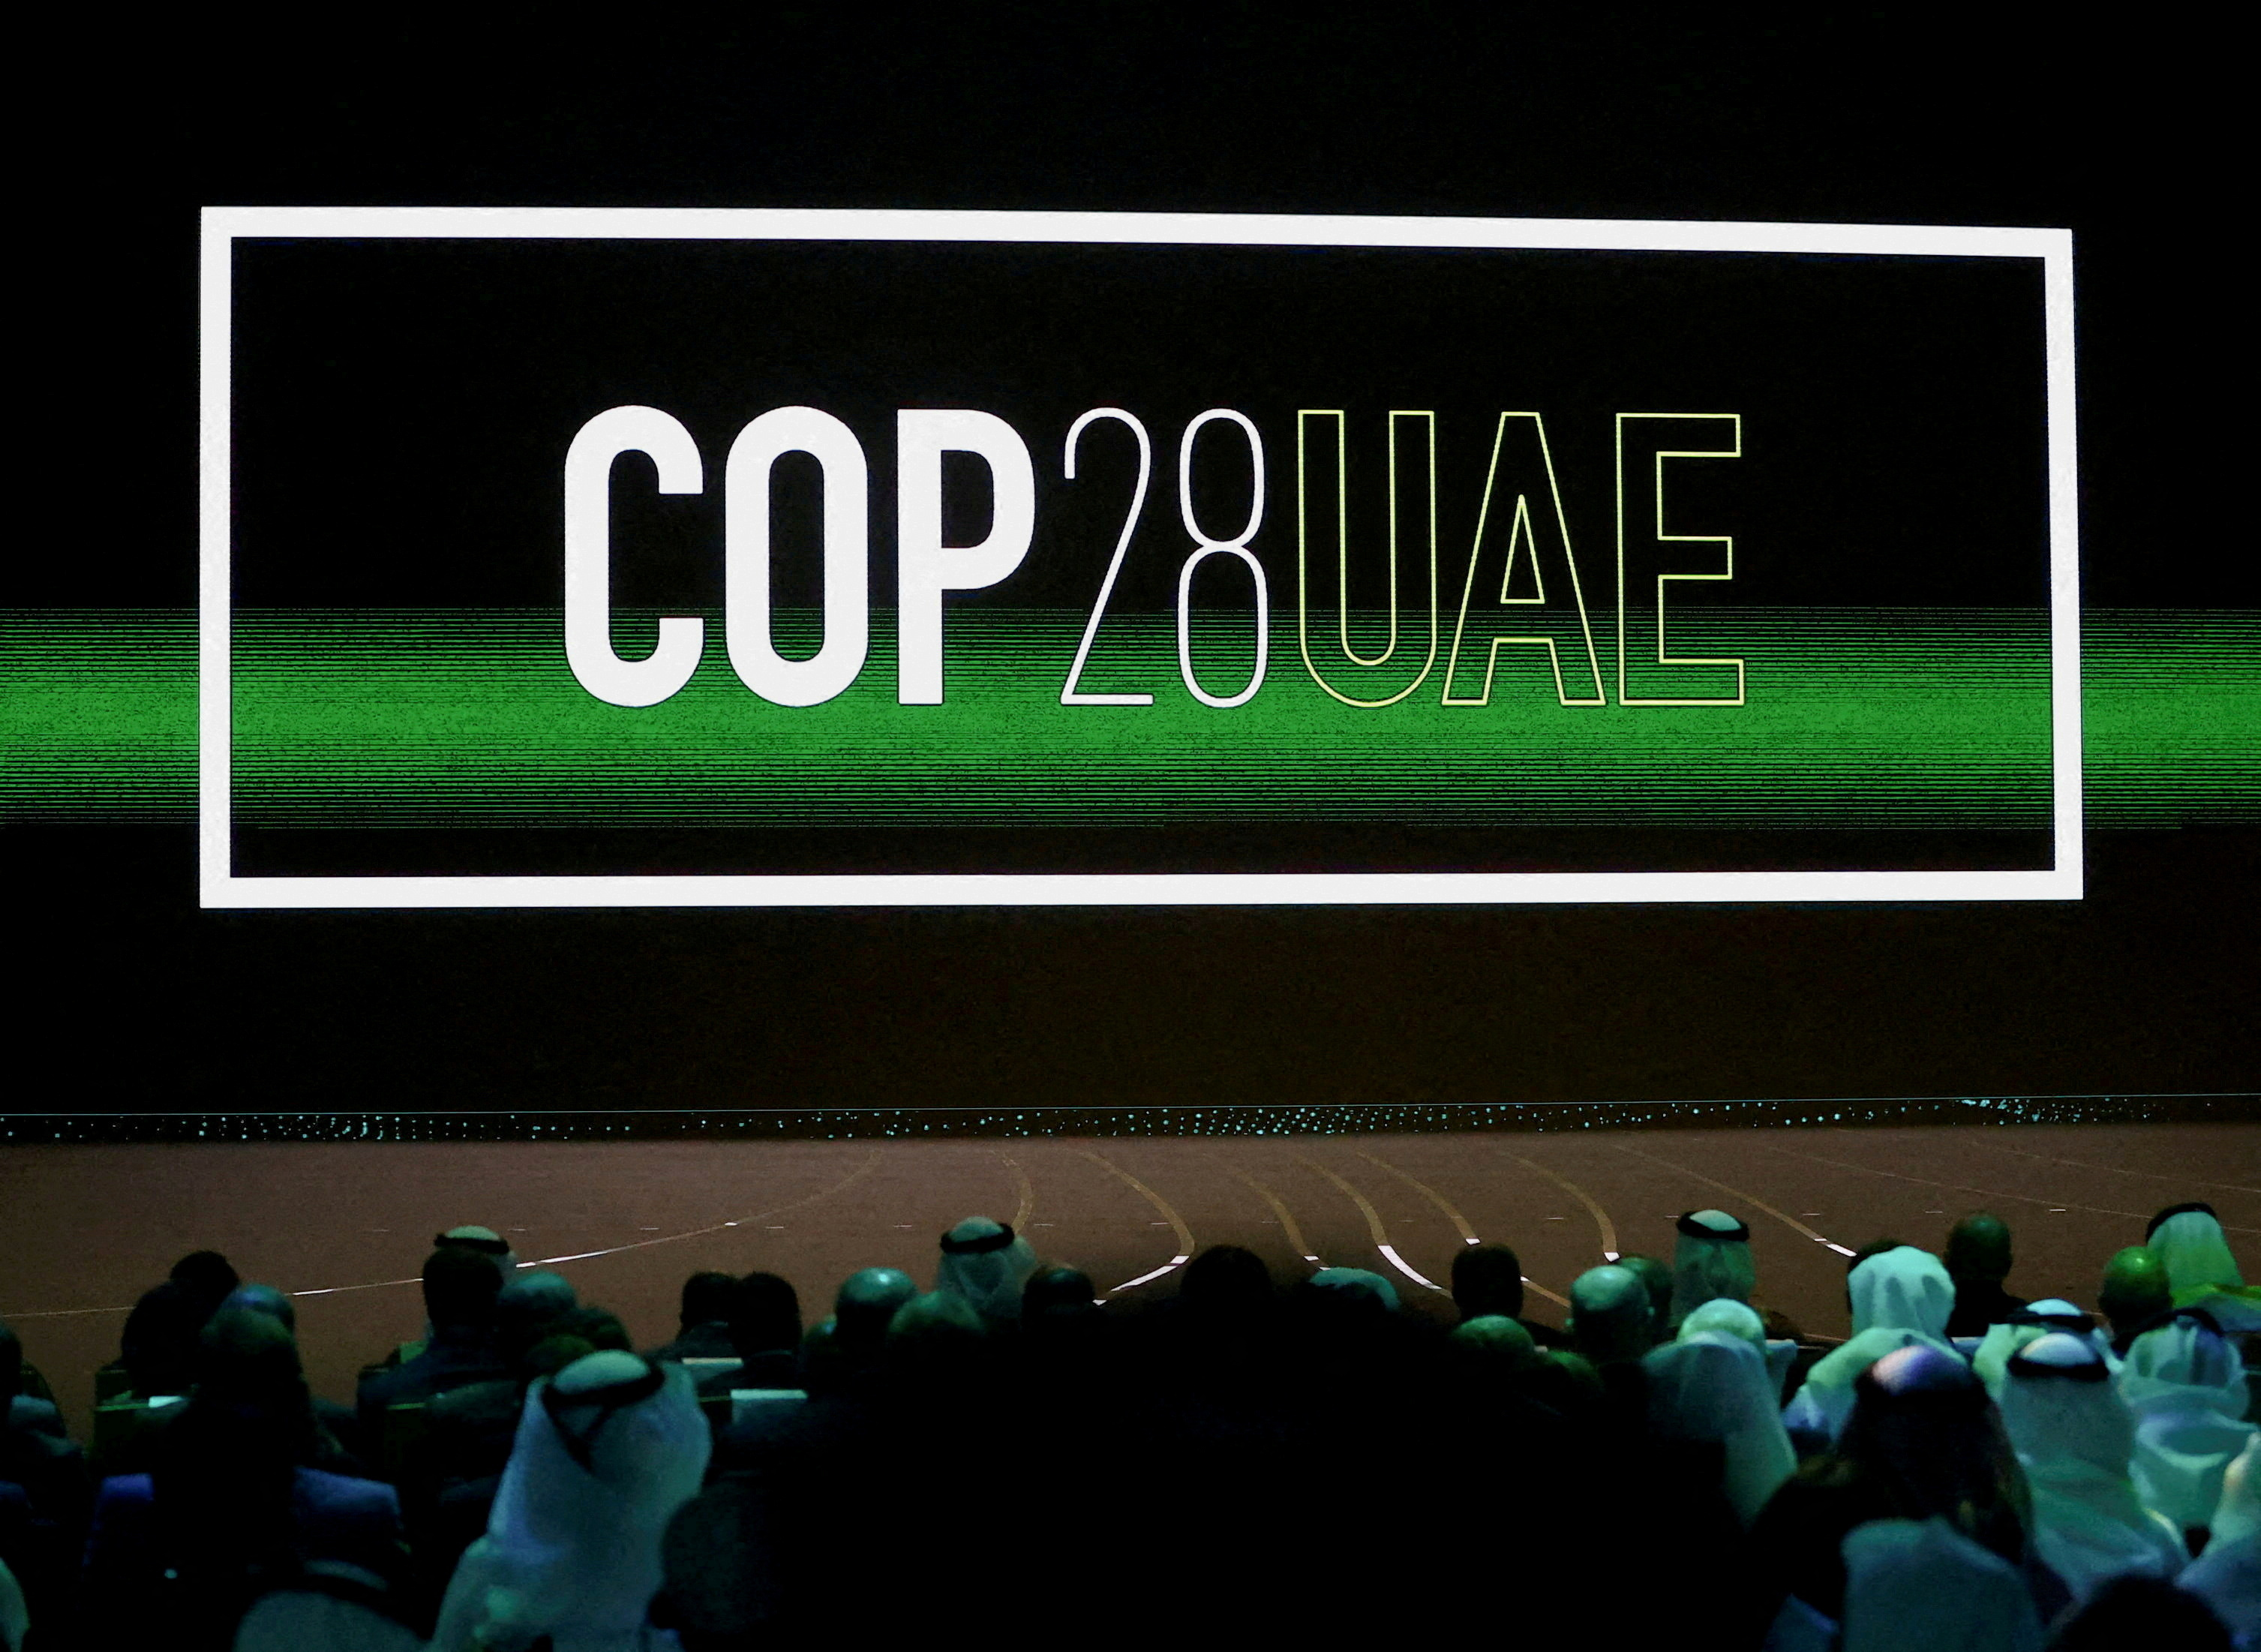 'Cop28 UAE' logo is displayed on the screen during the opening ceremony of Abu Dhabi Sustainability Week (ADSW) under the theme of 'United on Climate Action Toward COP28', in Abu Dhabi